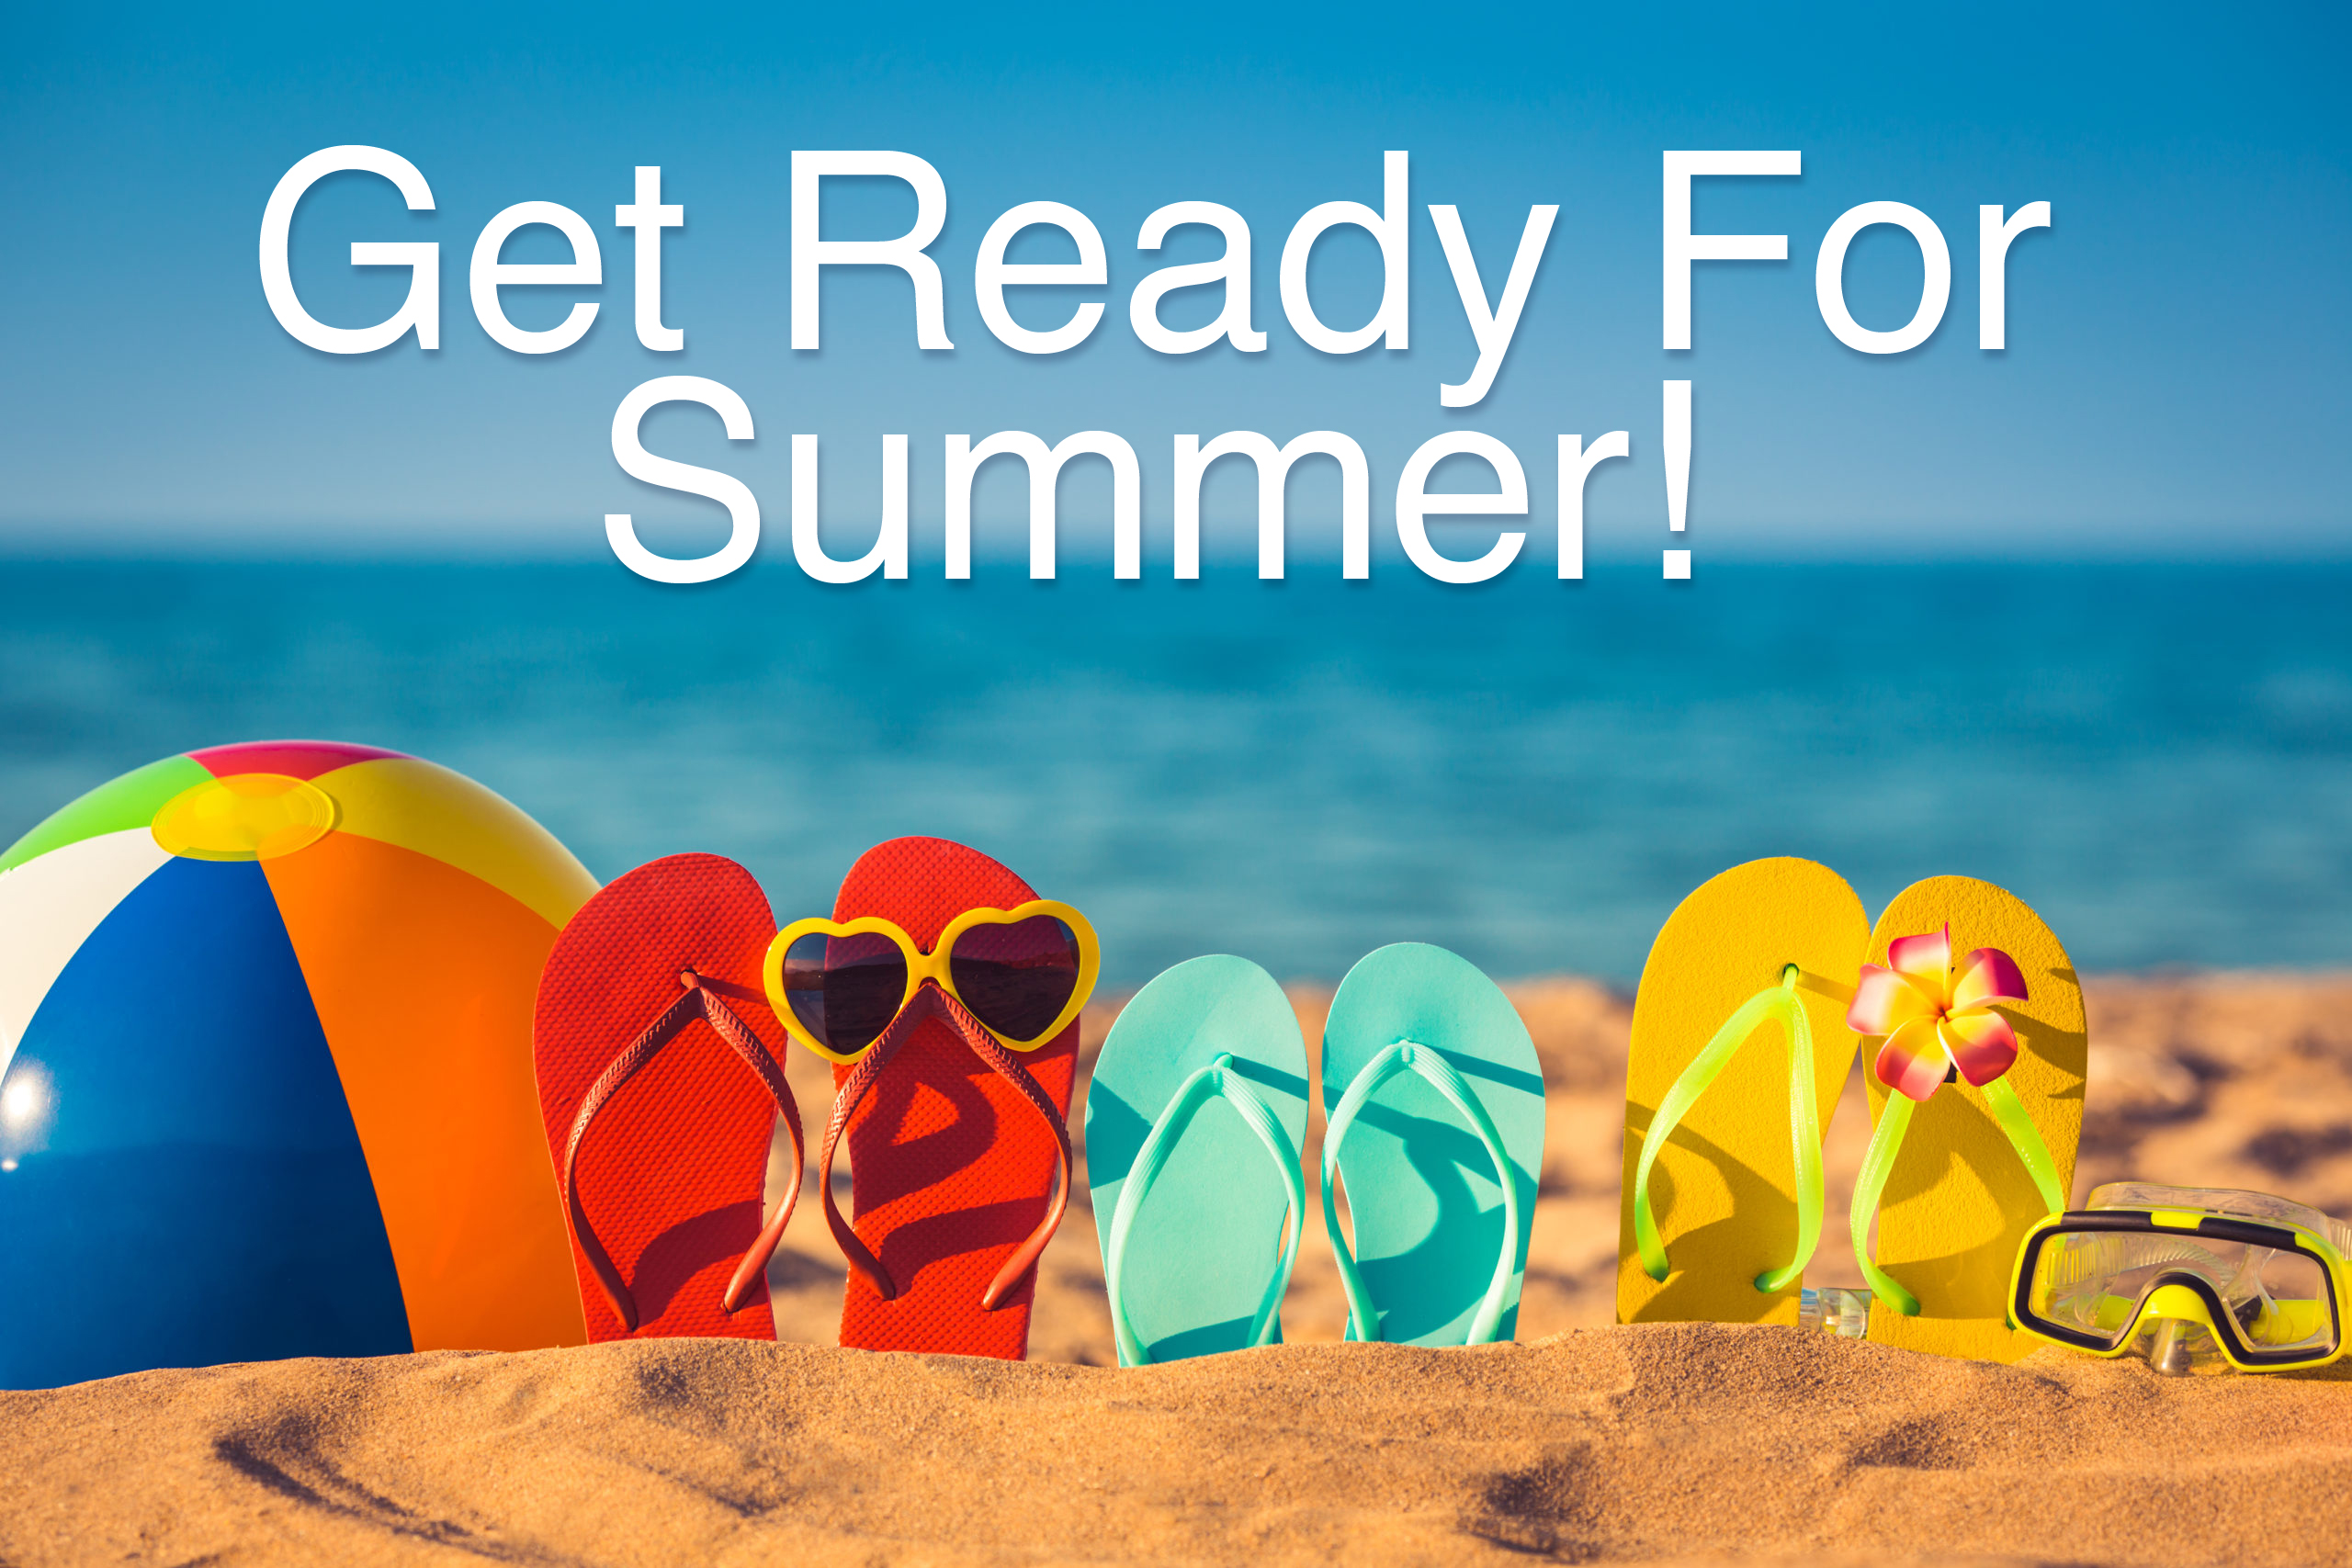 Prepping Your Storage for Summer! | The Storage Inn Blog